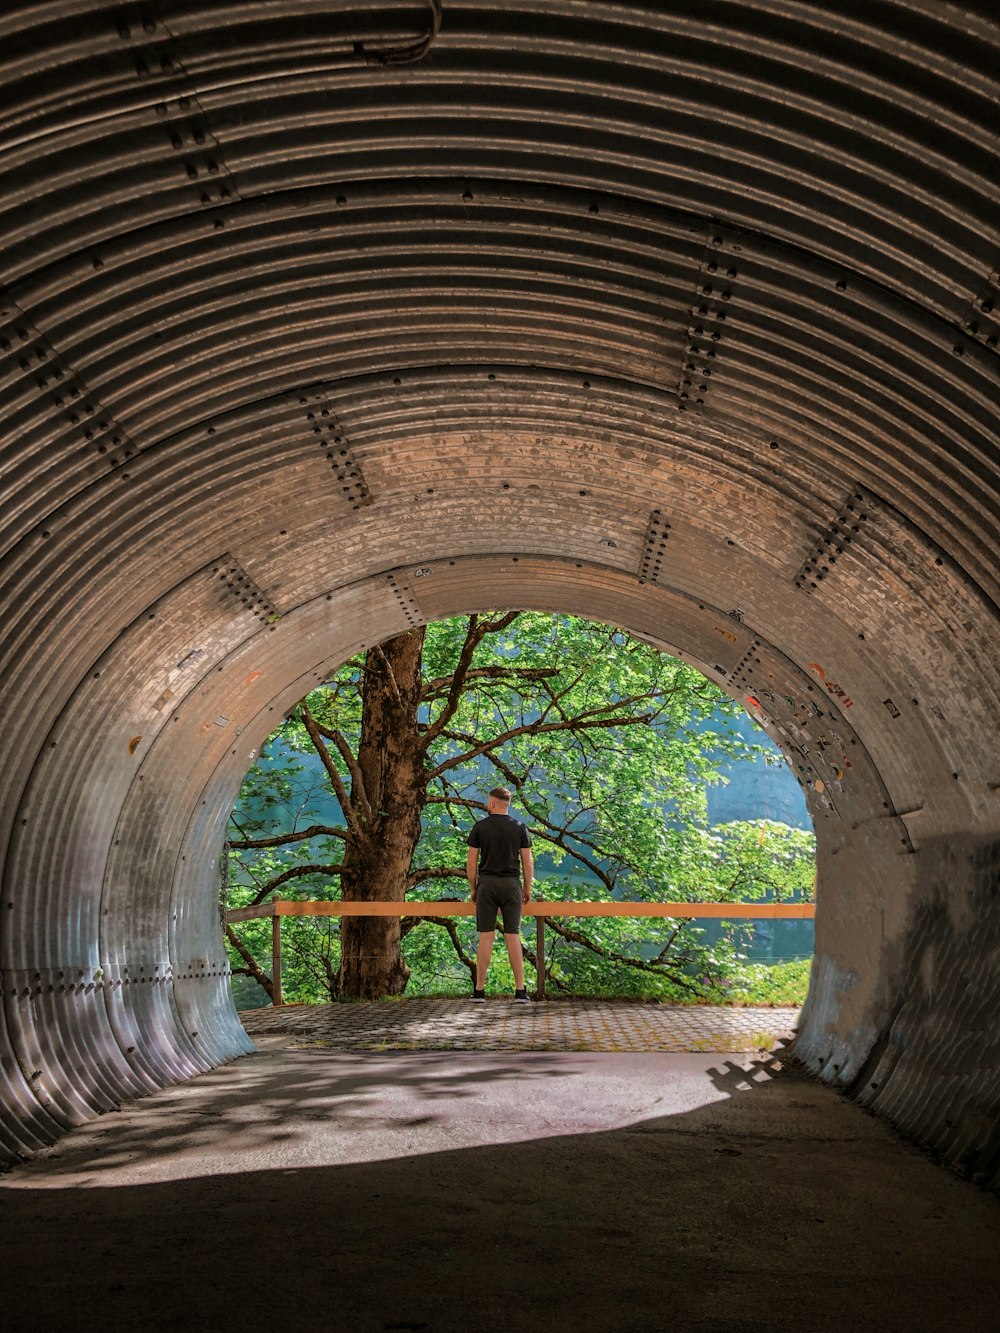 a person standing in a tunnel